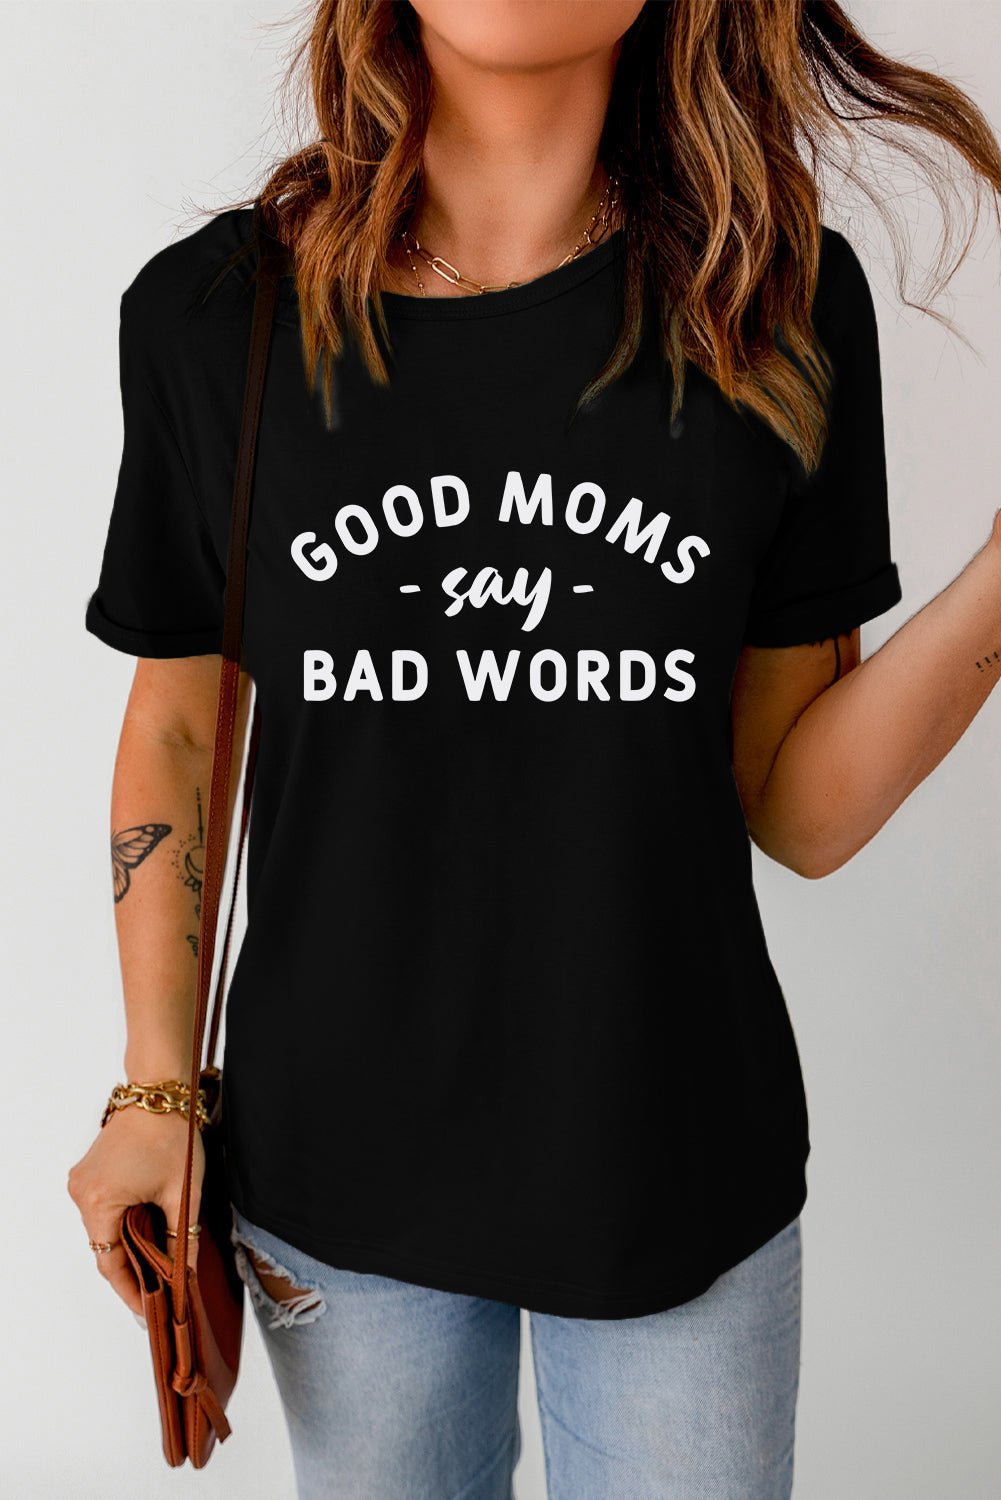 GOOD MOMS SAY BAD WORDS Graphic Tee - Fashion Girl Online Store